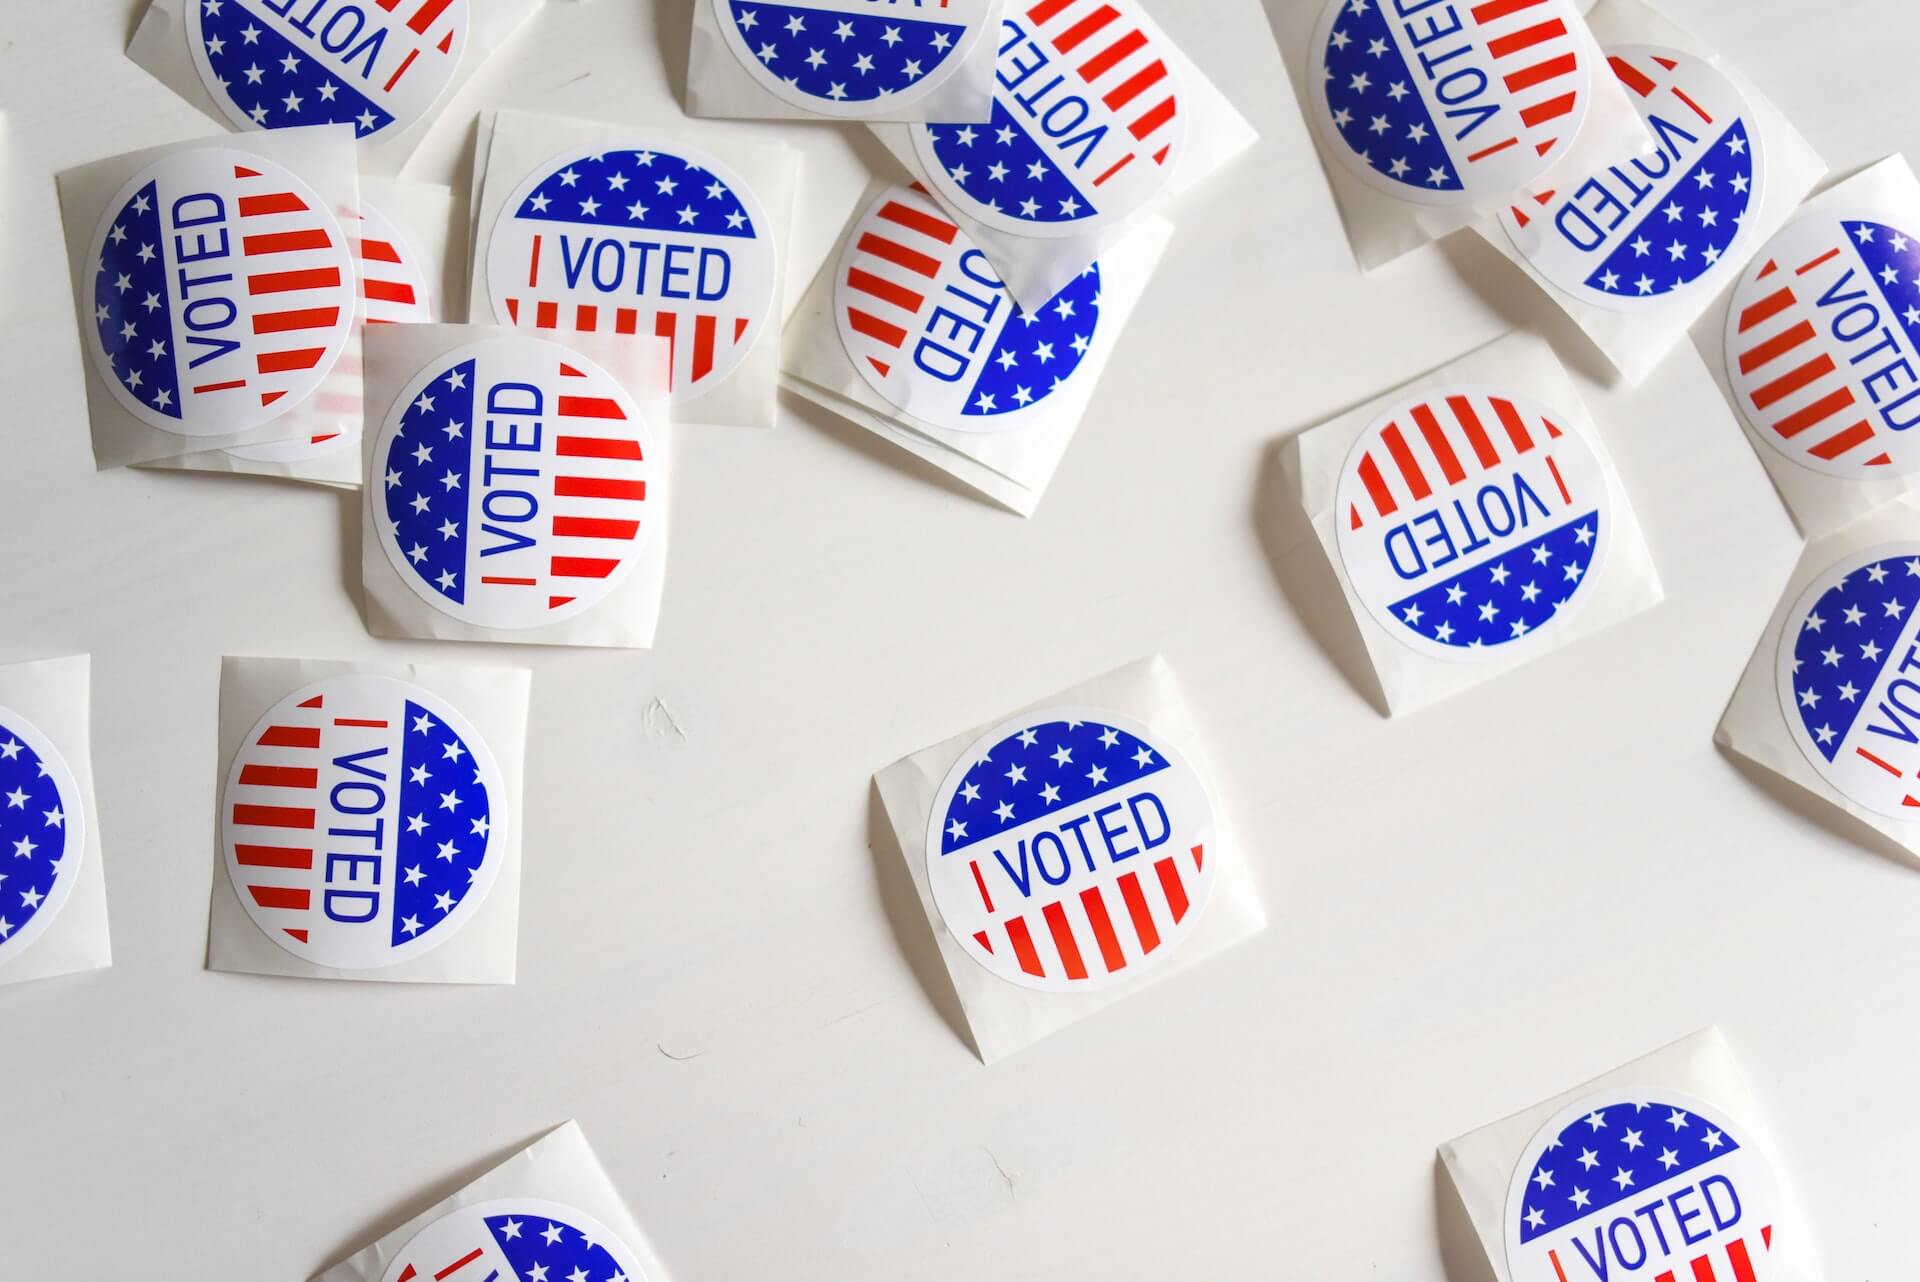 "I Voted" stickers on a white background